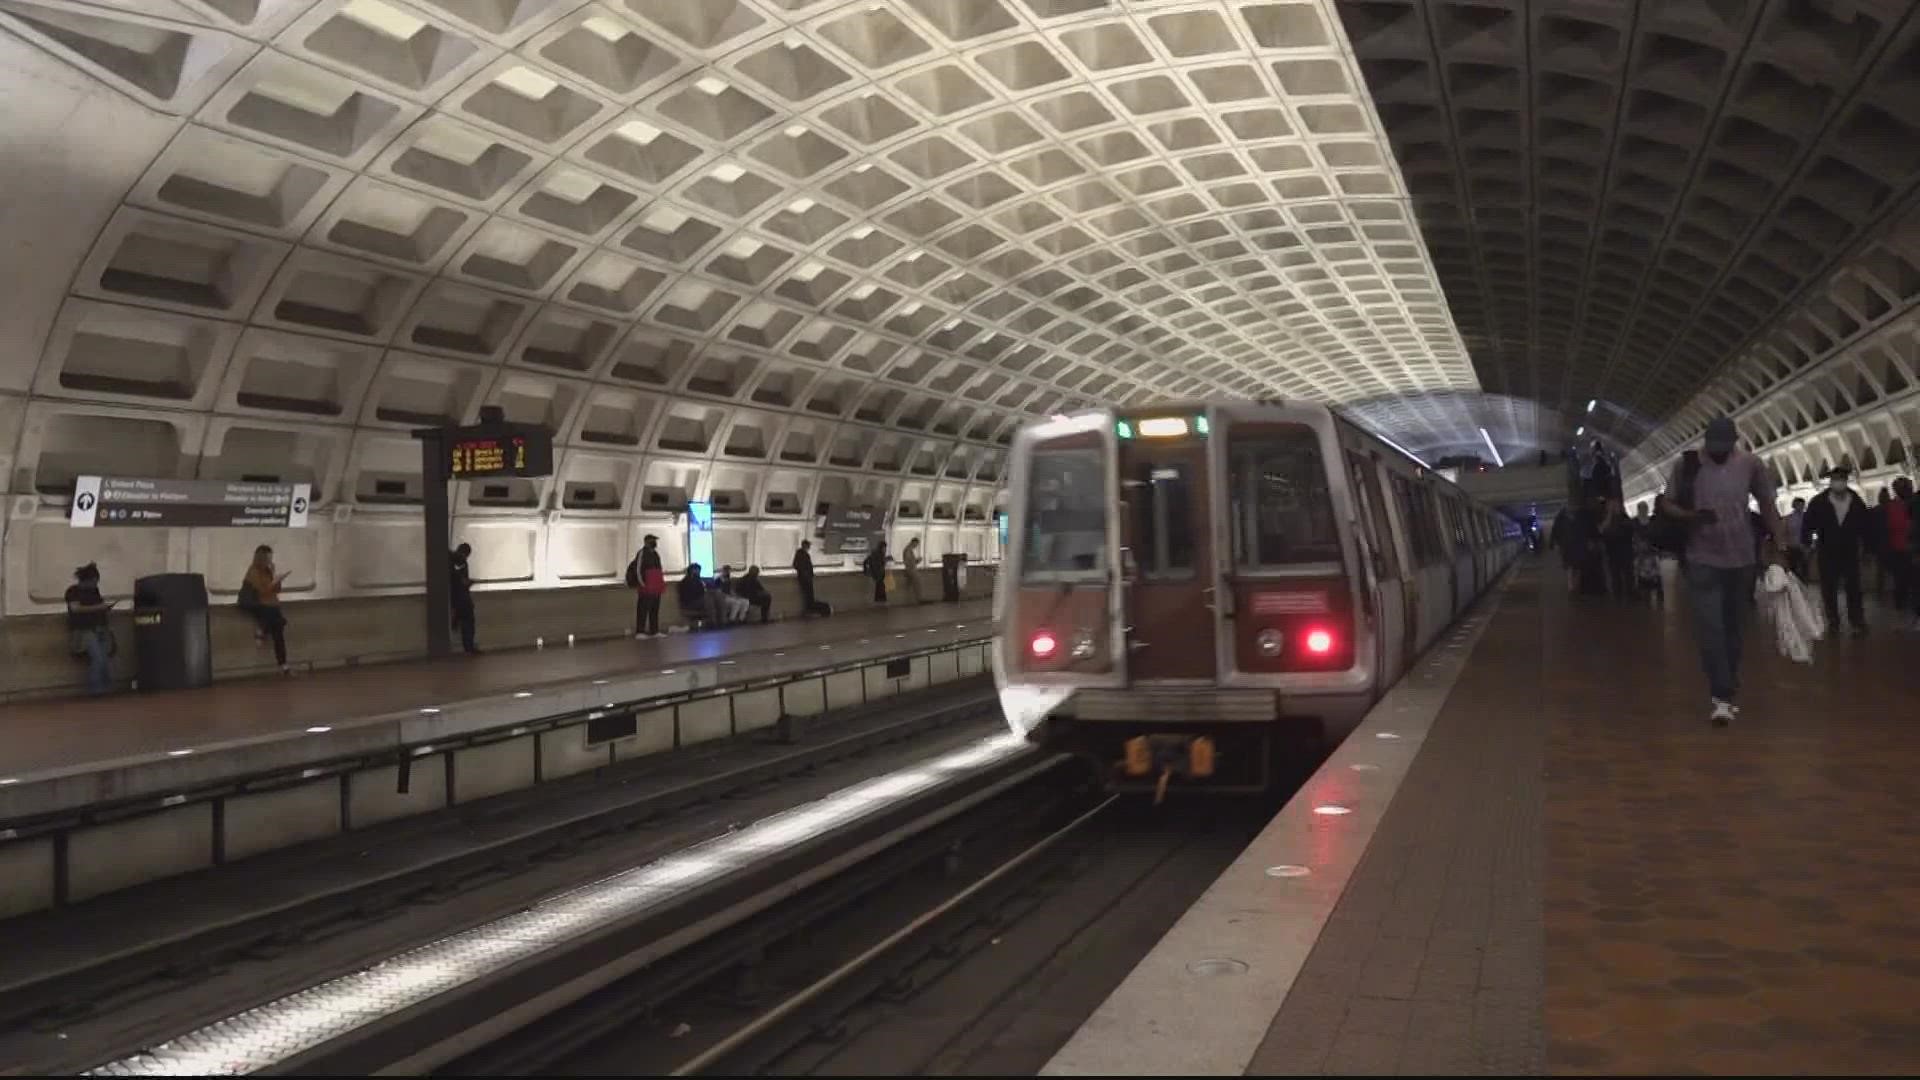 The Washington Metropolitan Area Transit Authority, announced plans Monday to add more trains to the Blue, Orange and Blue Plus lines during rush hours start Tuesday